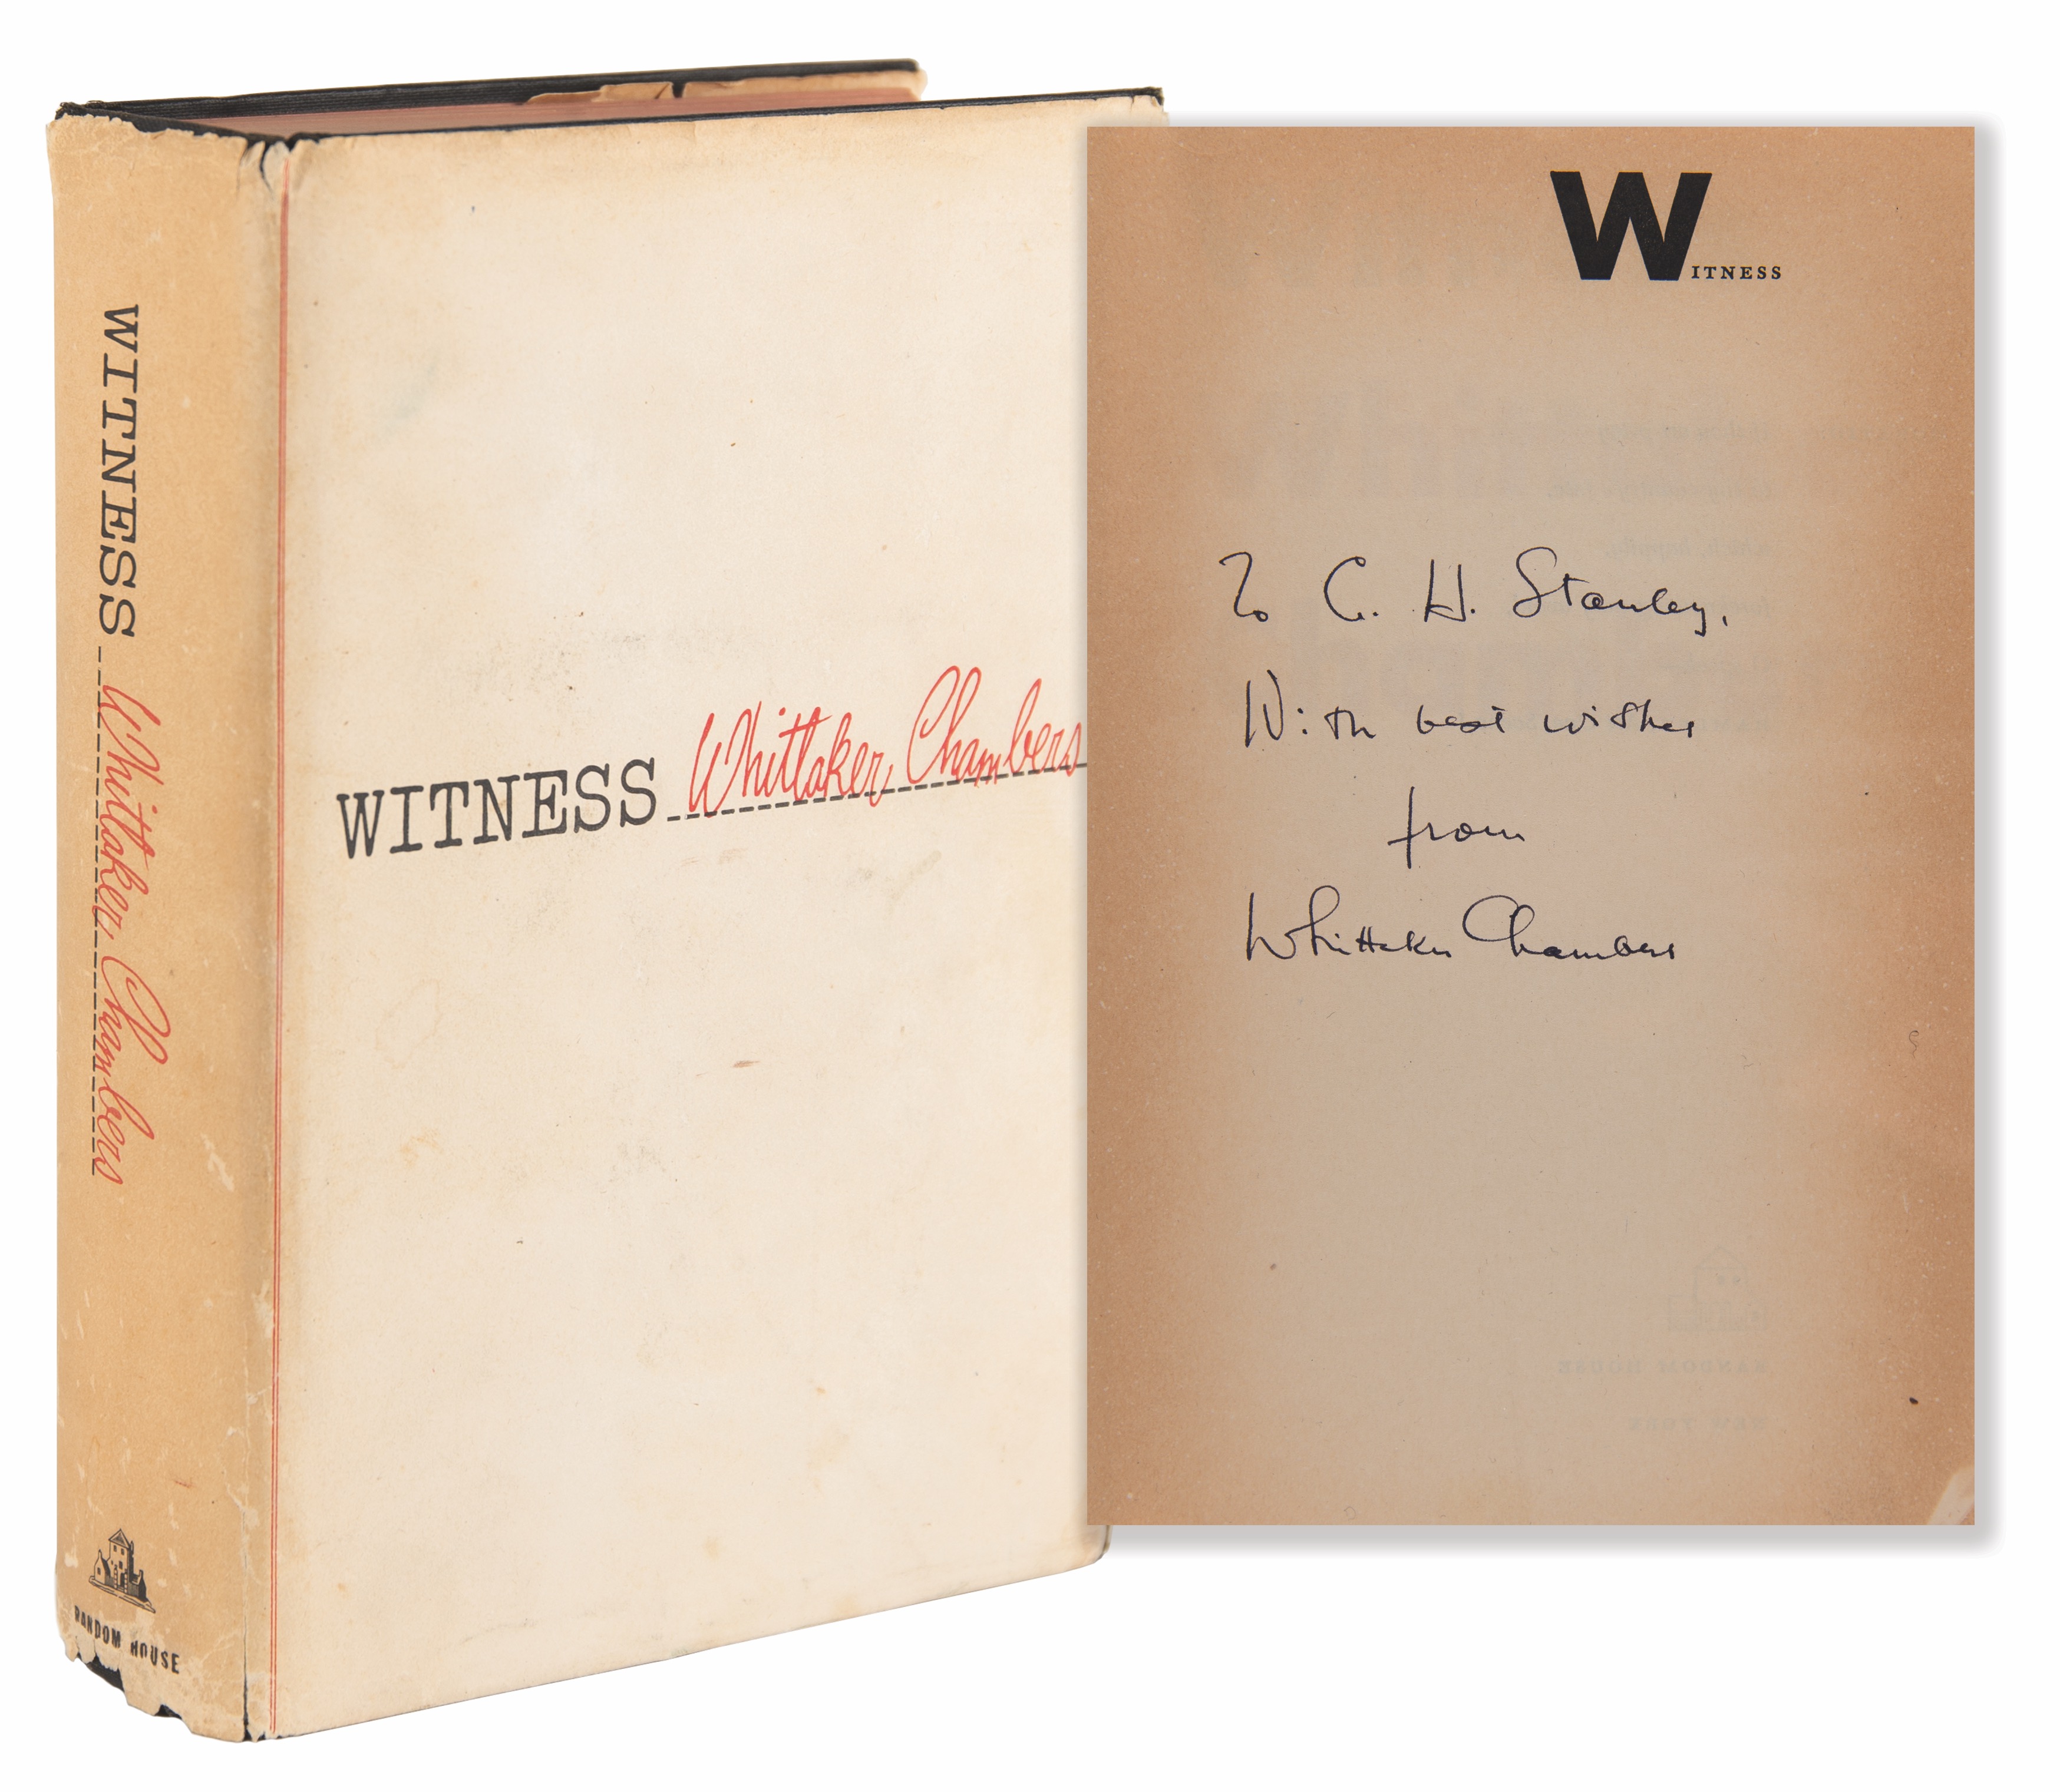 Lot #207 Whittaker Chambers Signed Book - Witness - Image 1